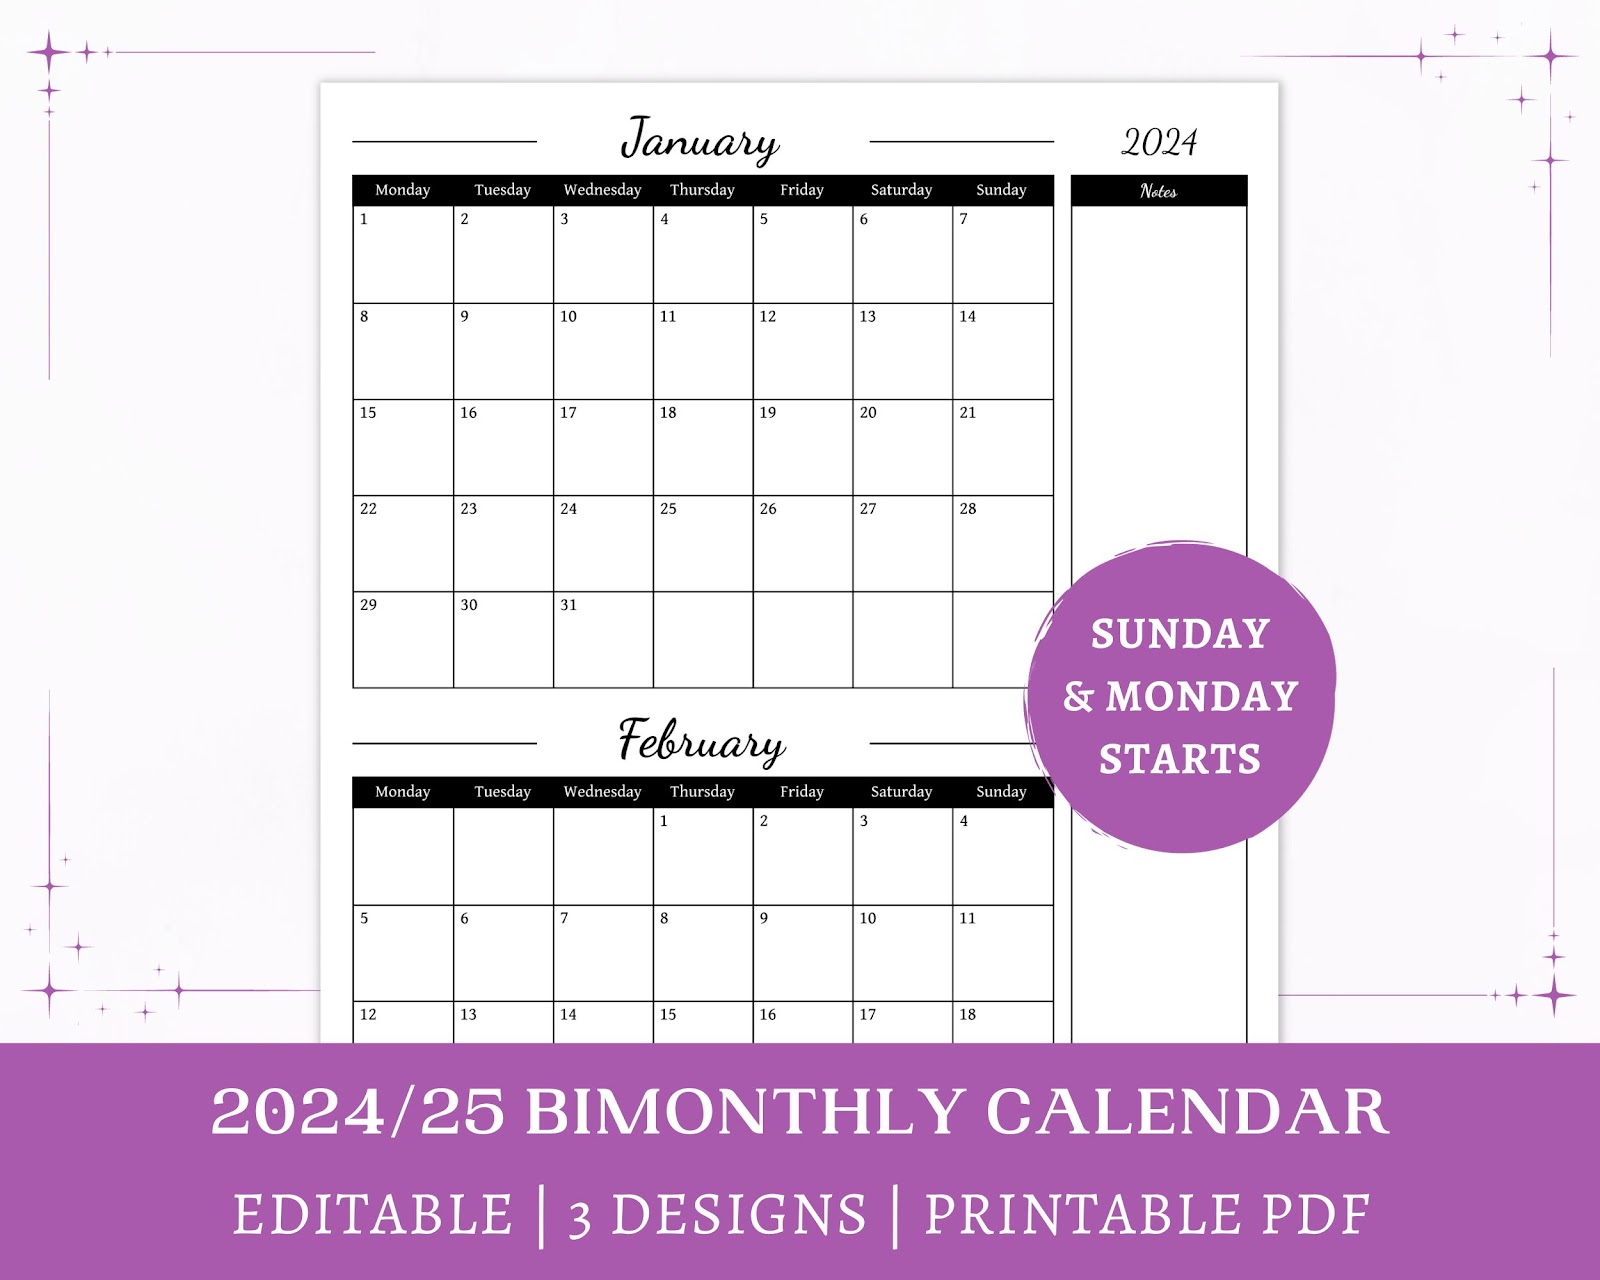 Minimalist black-and-white design on a dated bimonthly calendar